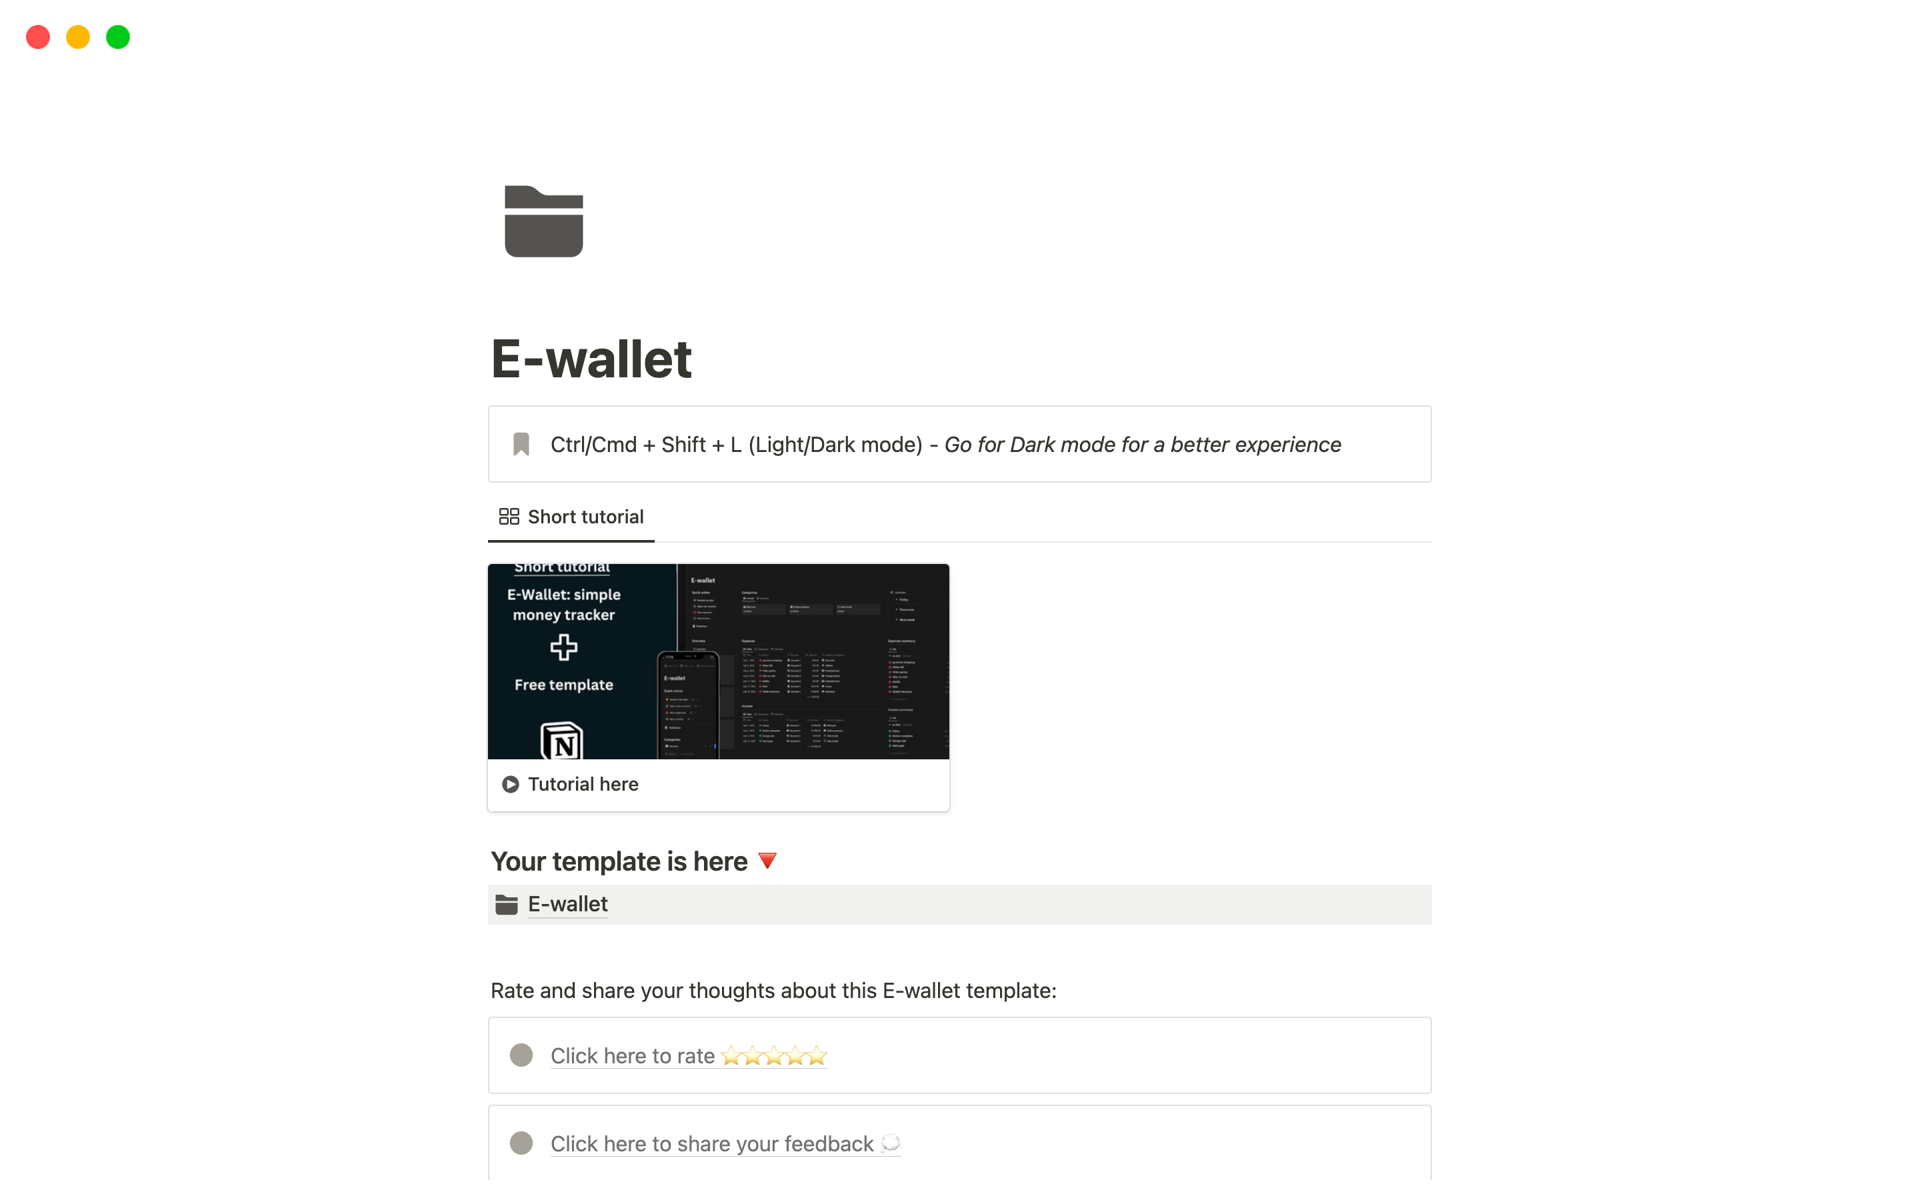 E-wallet is a system that helps you keep track of your income and expenses. It can be used to track your spending habits, identify areas where you can cut back, and set financial goals